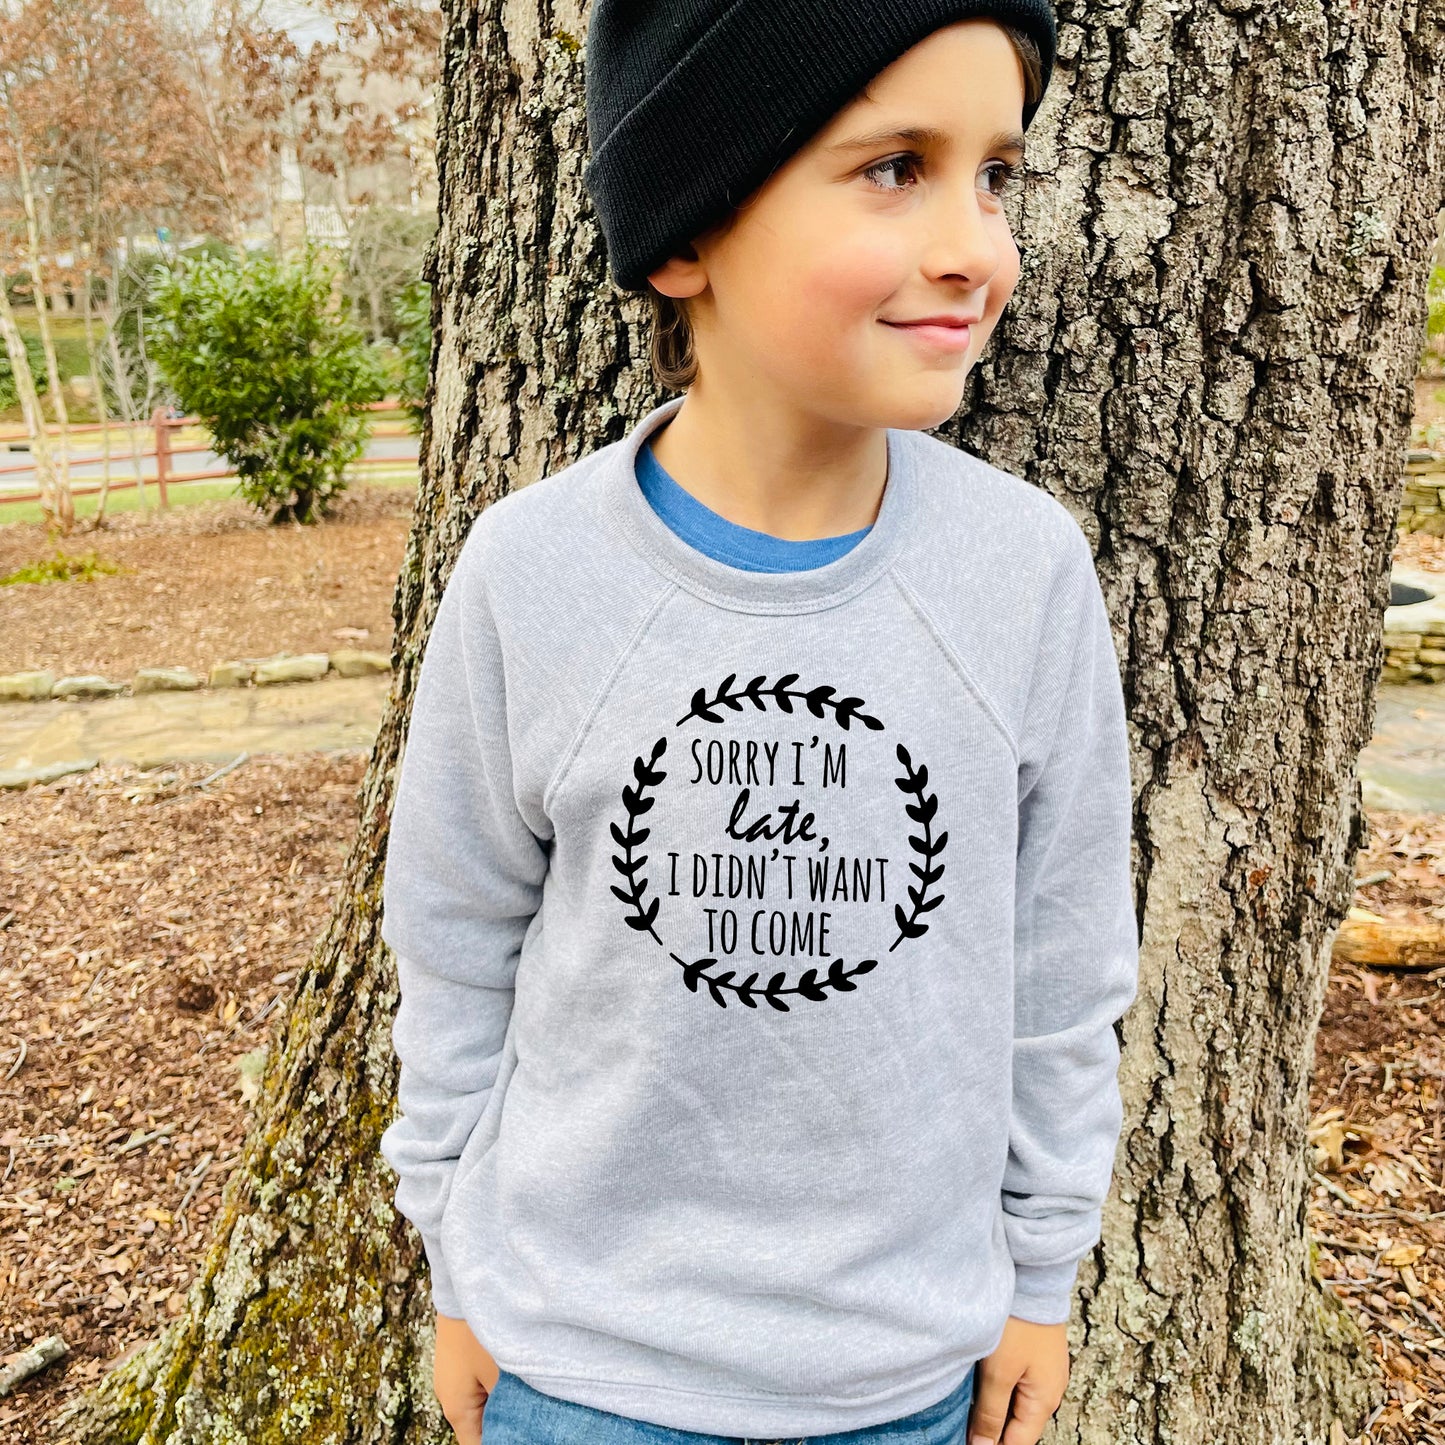 Sorry I'm Late, I Didn't Want To Come - Kid's Sweatshirt - Heather Gray or Mauve